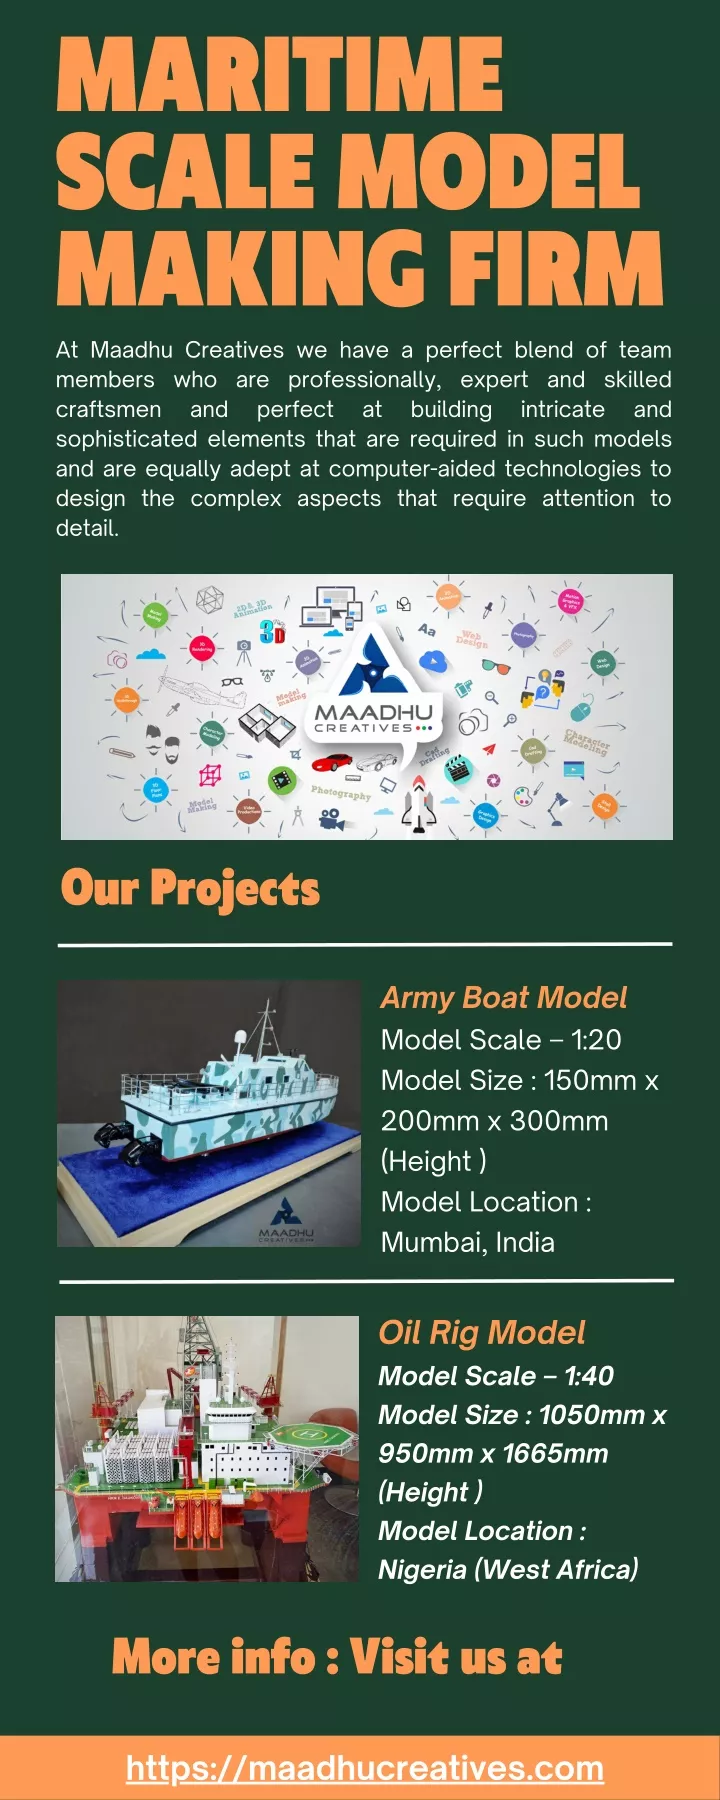 maritime scale model making firm